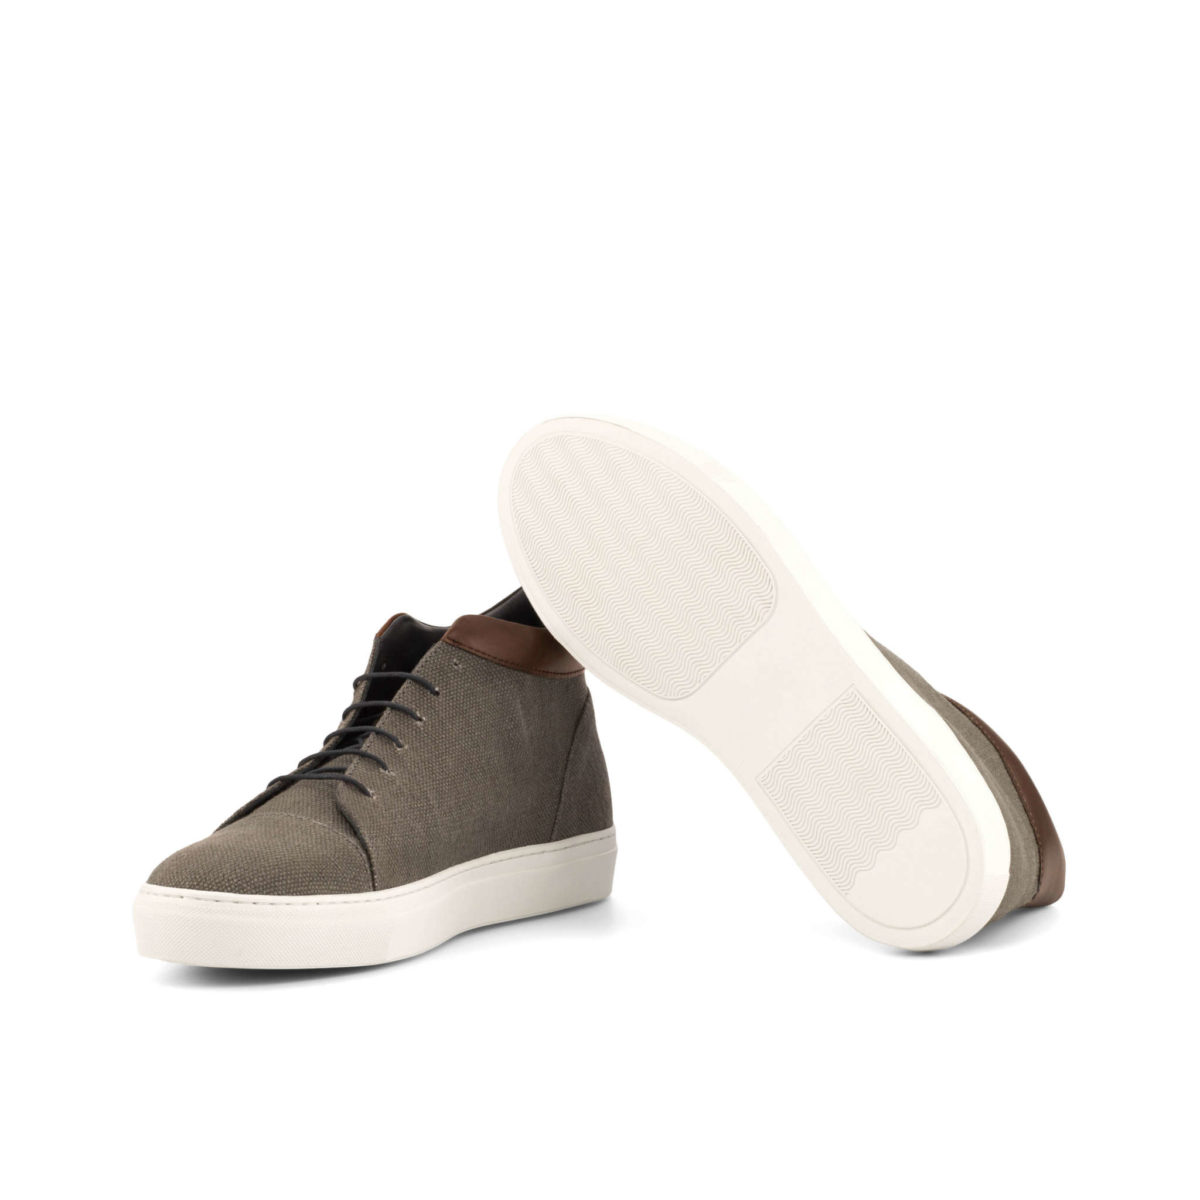 Handmade High Top shoes |  Mens Casual